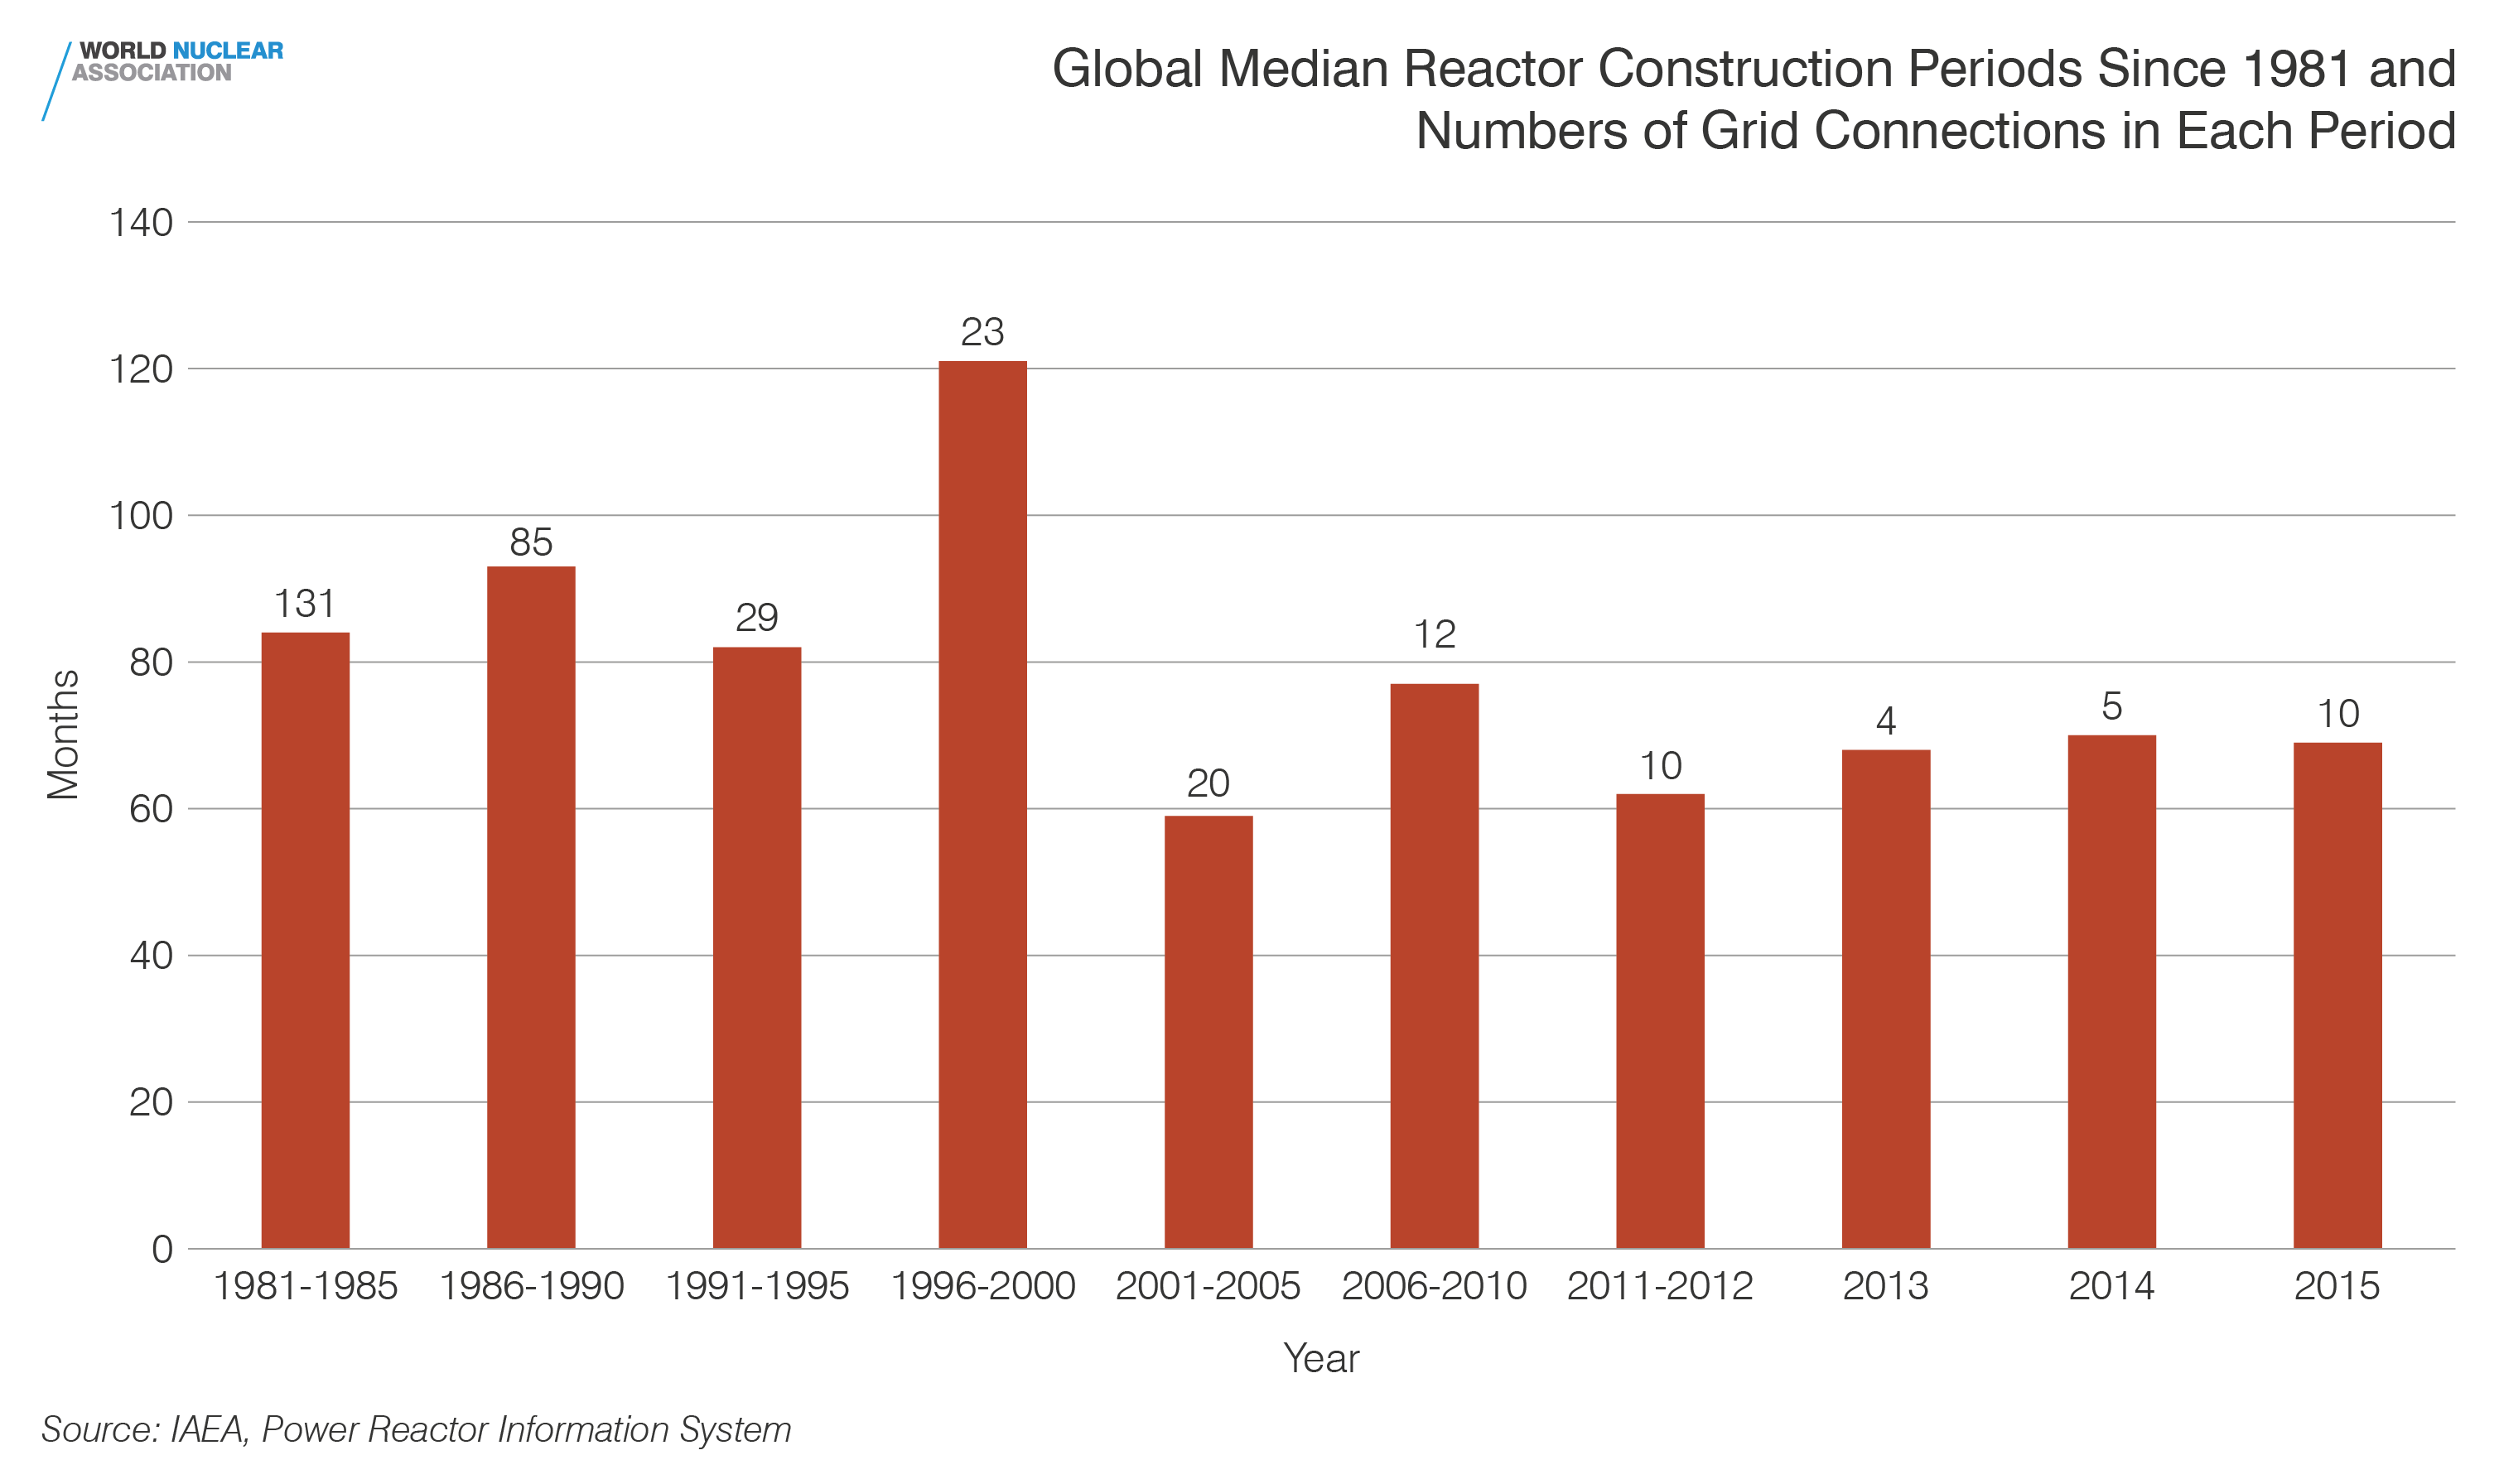 Global median reactor construction periods since 1981